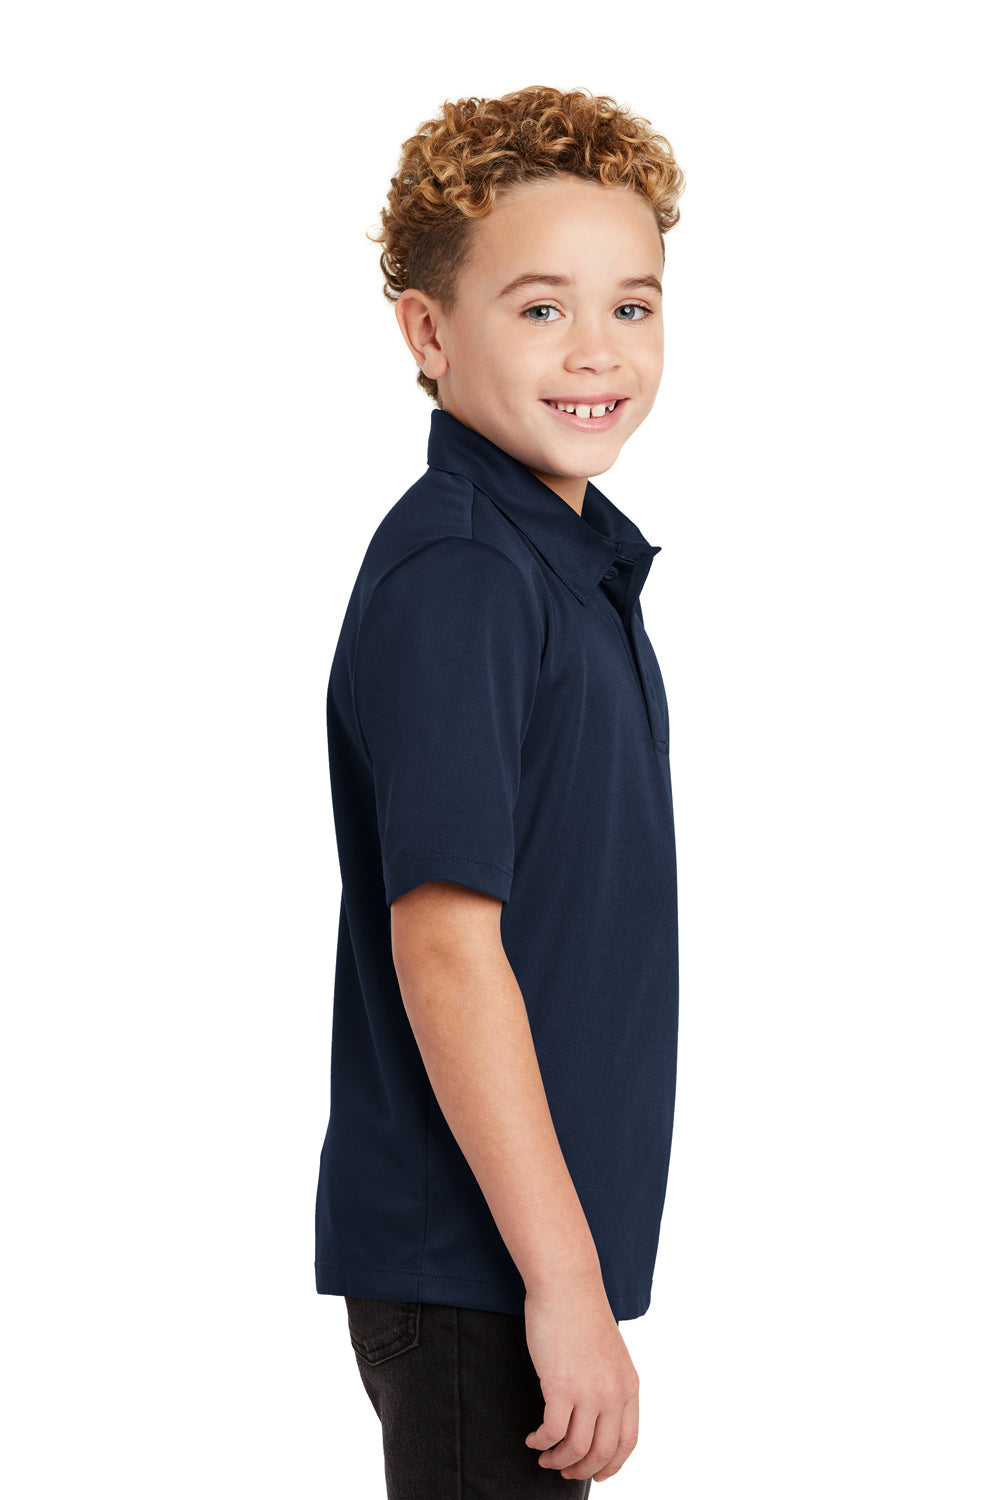 Port Authority Y540 Youth Silk Touch Performance Moisture Wicking Short Sleeve Polo Shirt Navy Blue Side